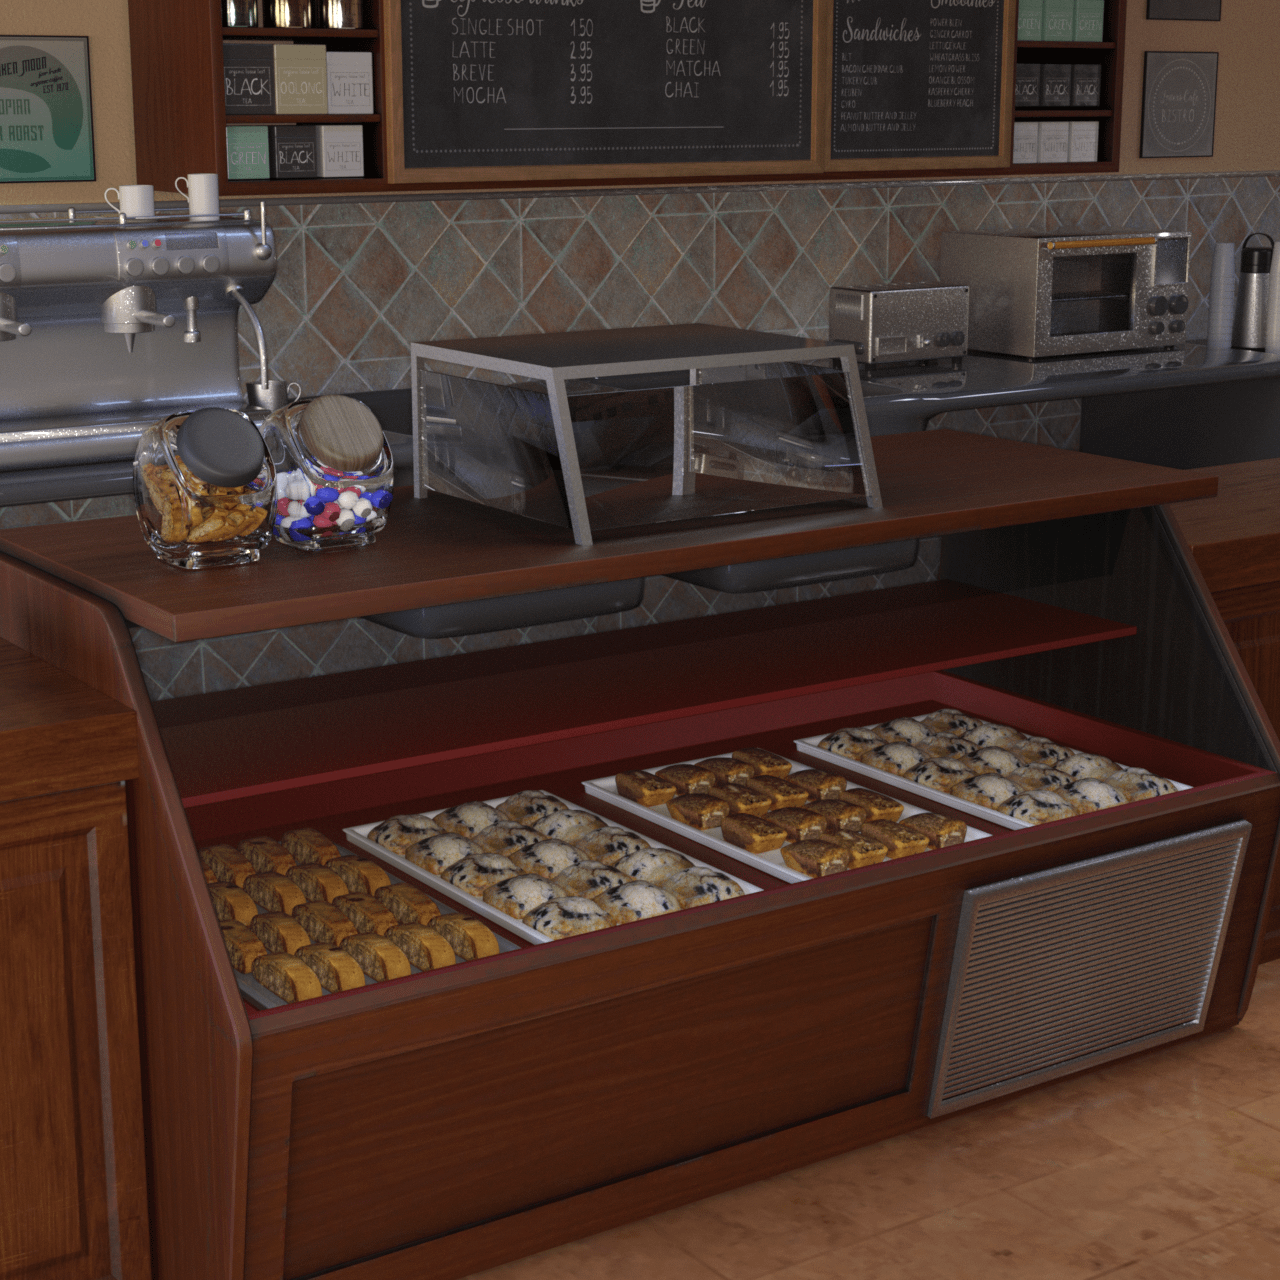 Detailed rendered view of the counter with different offered food